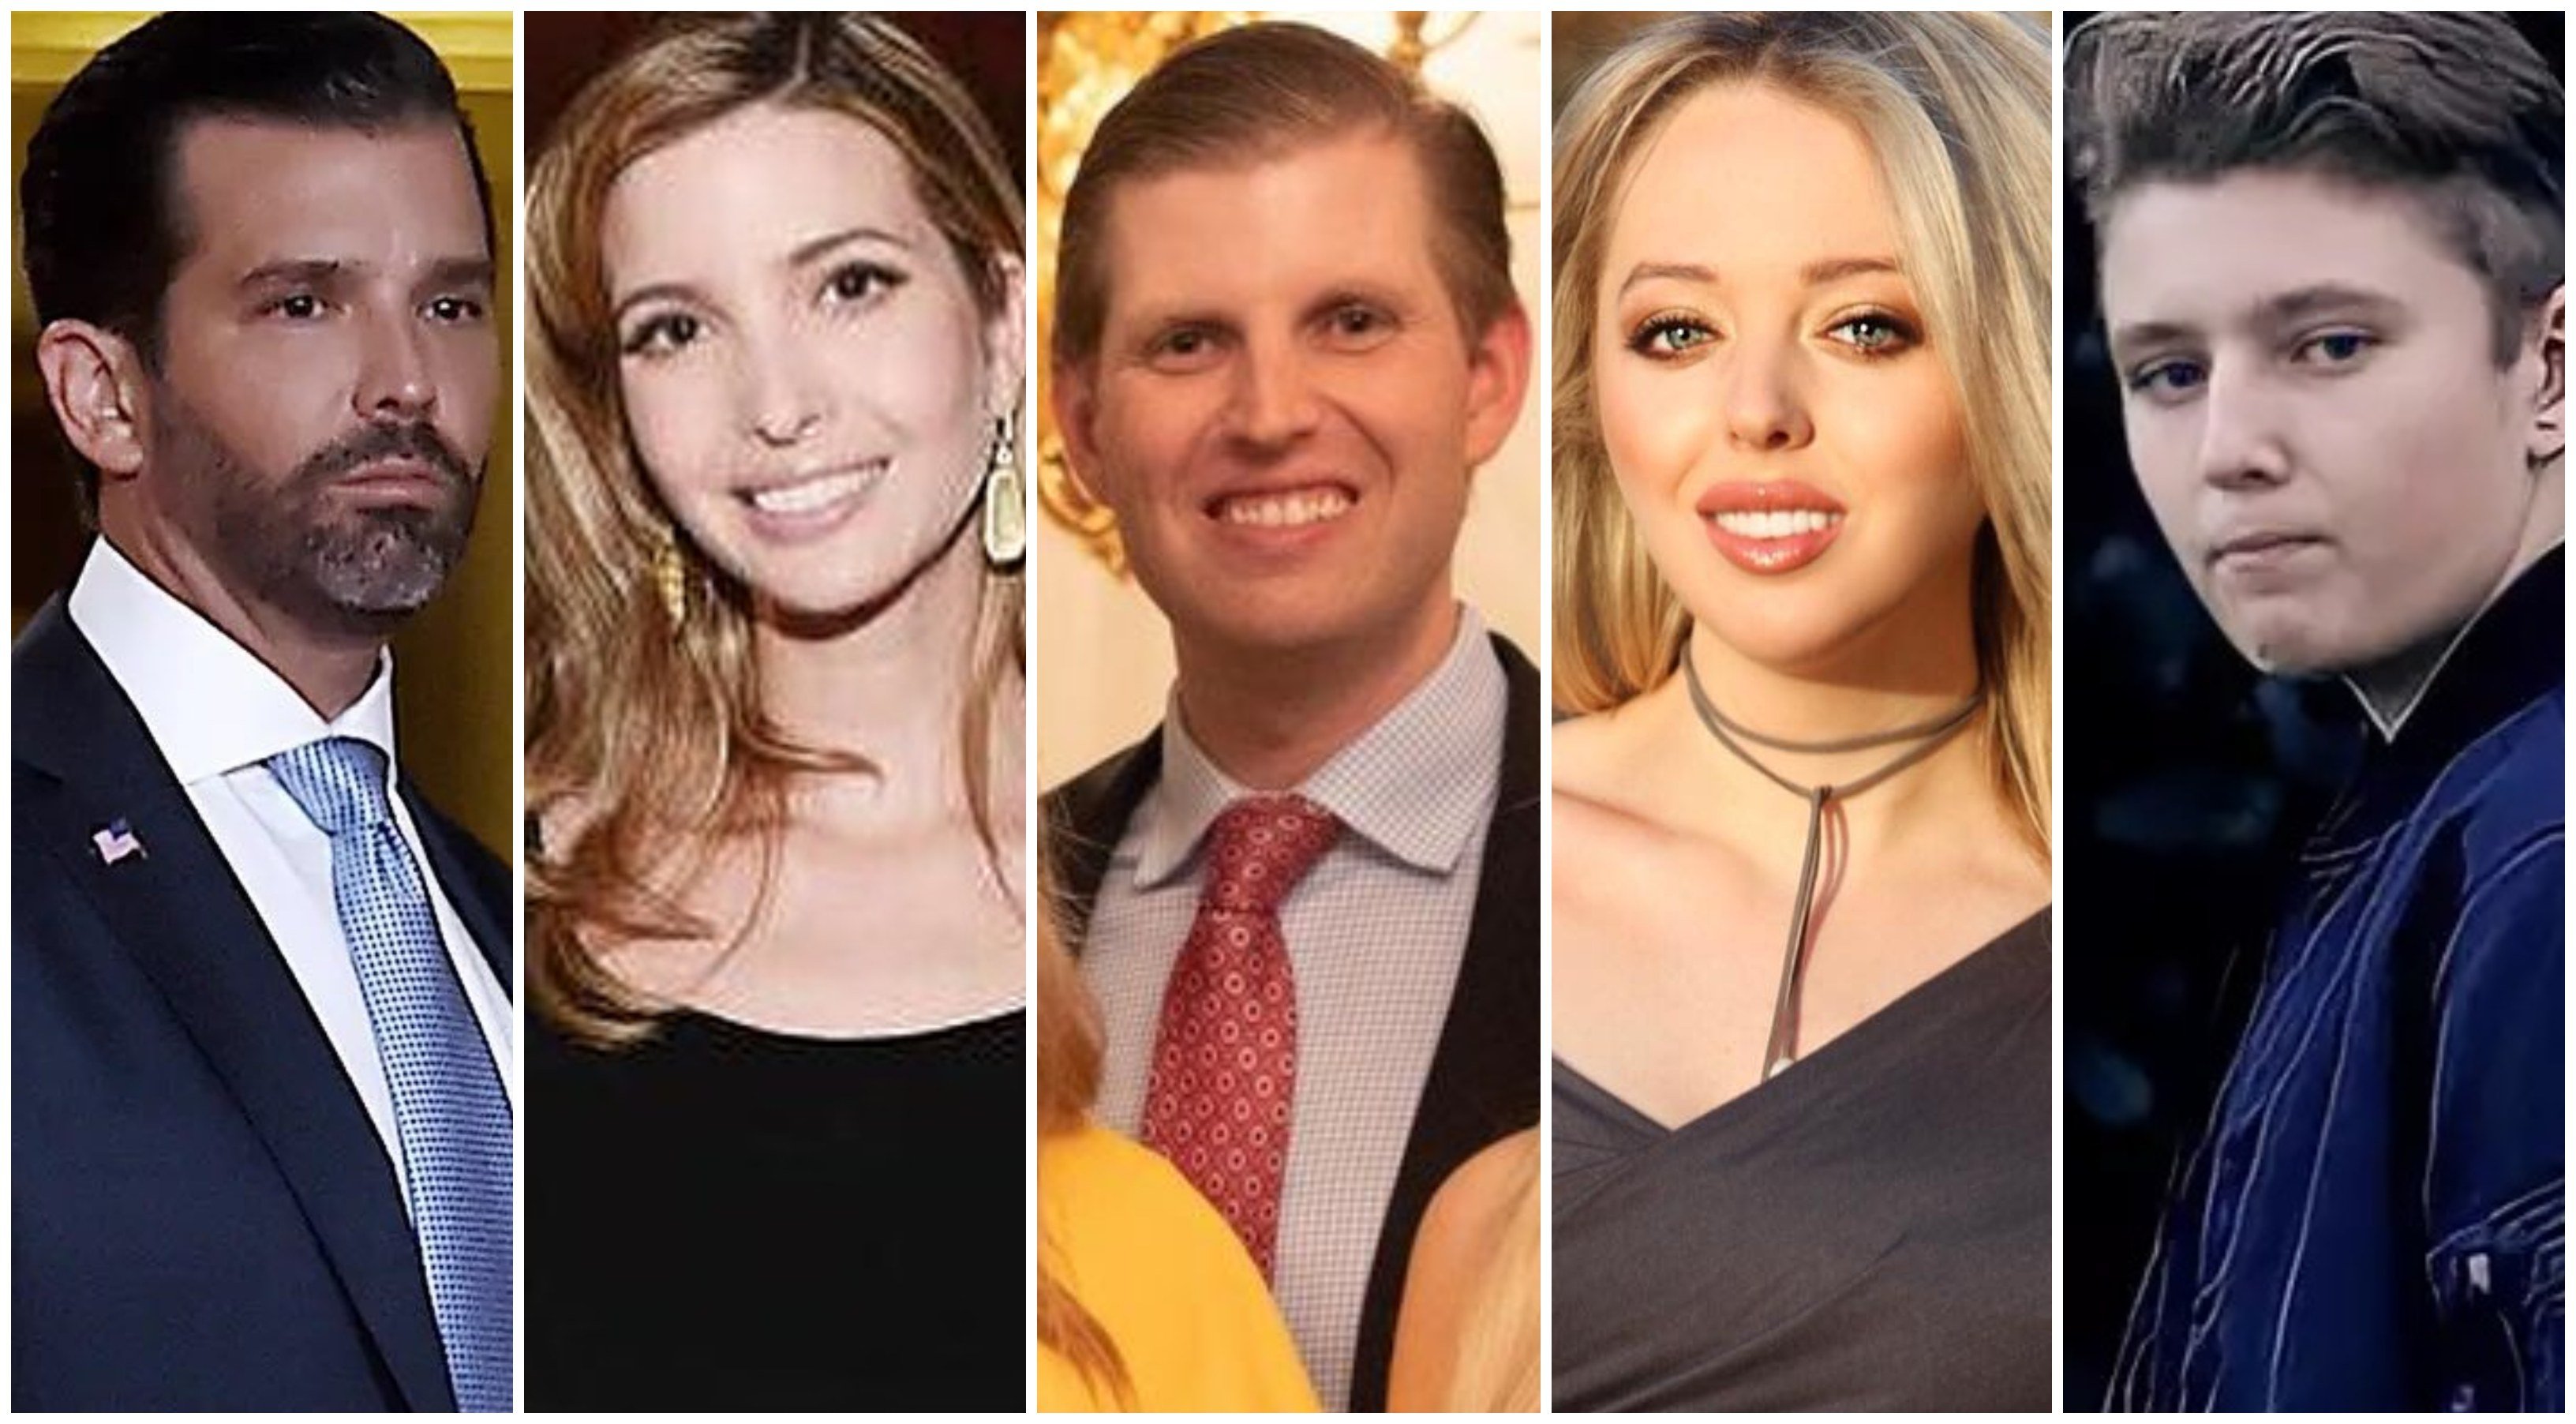 Eric, Ivanka, Donald Jr., Tiffany and Barron Trump may not all come from the same mother, but they all share the same father, Donald Trump. Photos: @onlytrumpjr, @ivankatrump_fan_page, @tiffanytrump, @barrontrumpmy/Instagram